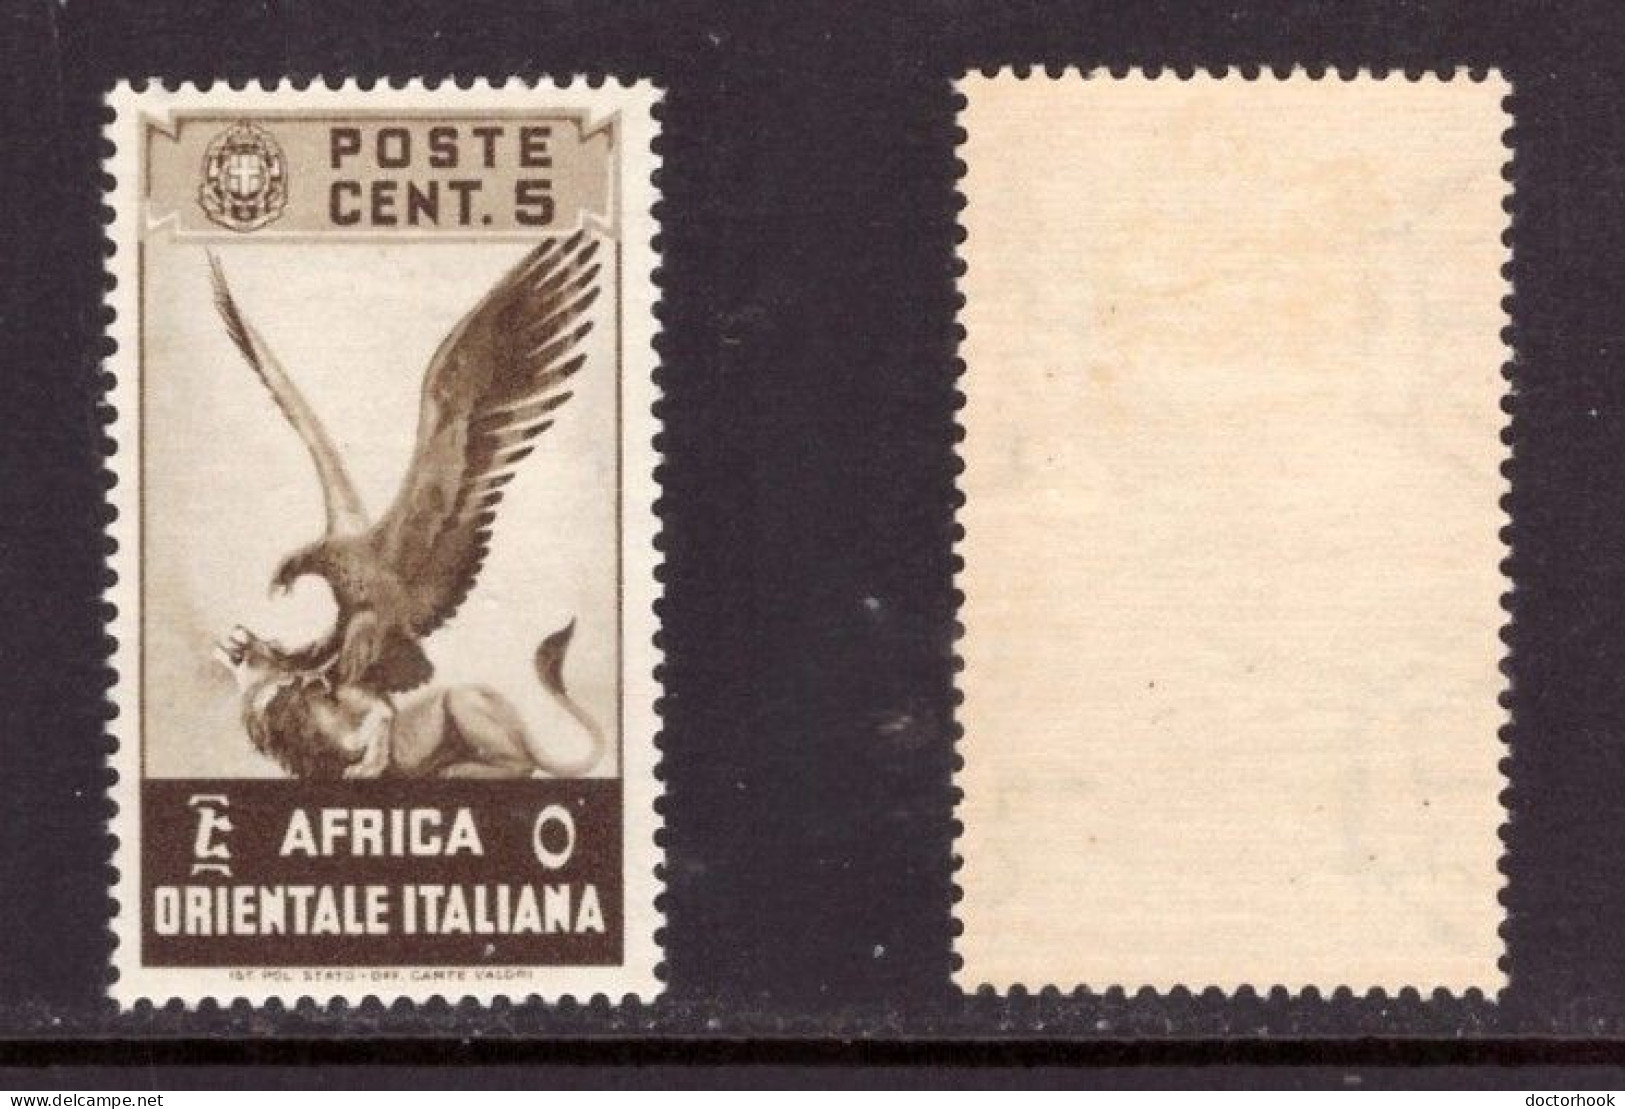 ITALIAN EAST AFRICA   Scott # 2* MINT LH (CONDITION AS PER SCAN) (Stamp Scan # 956-4) - Africa Orientale